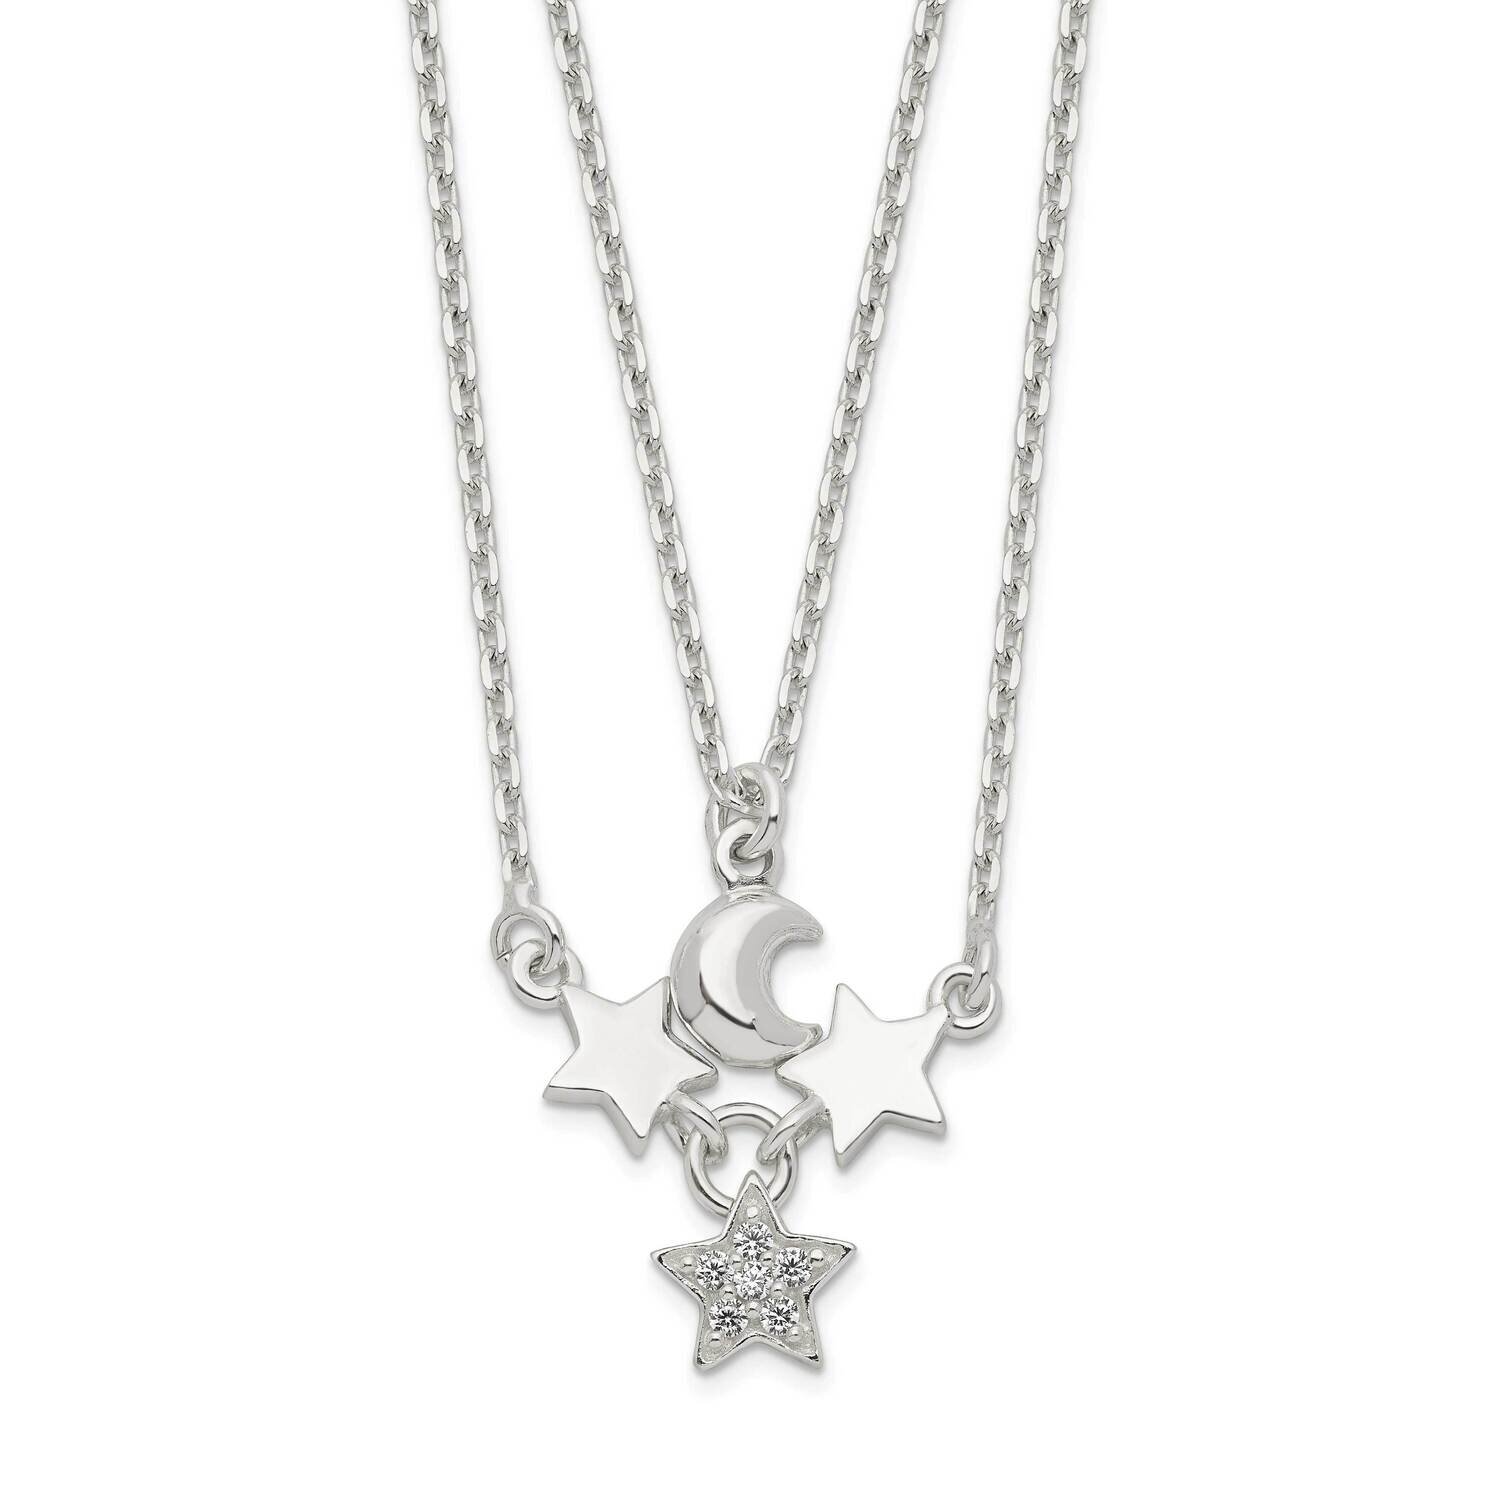 2-Strand Moon and Stars Necklace 16 Inch Sterling Silver QG6015-16